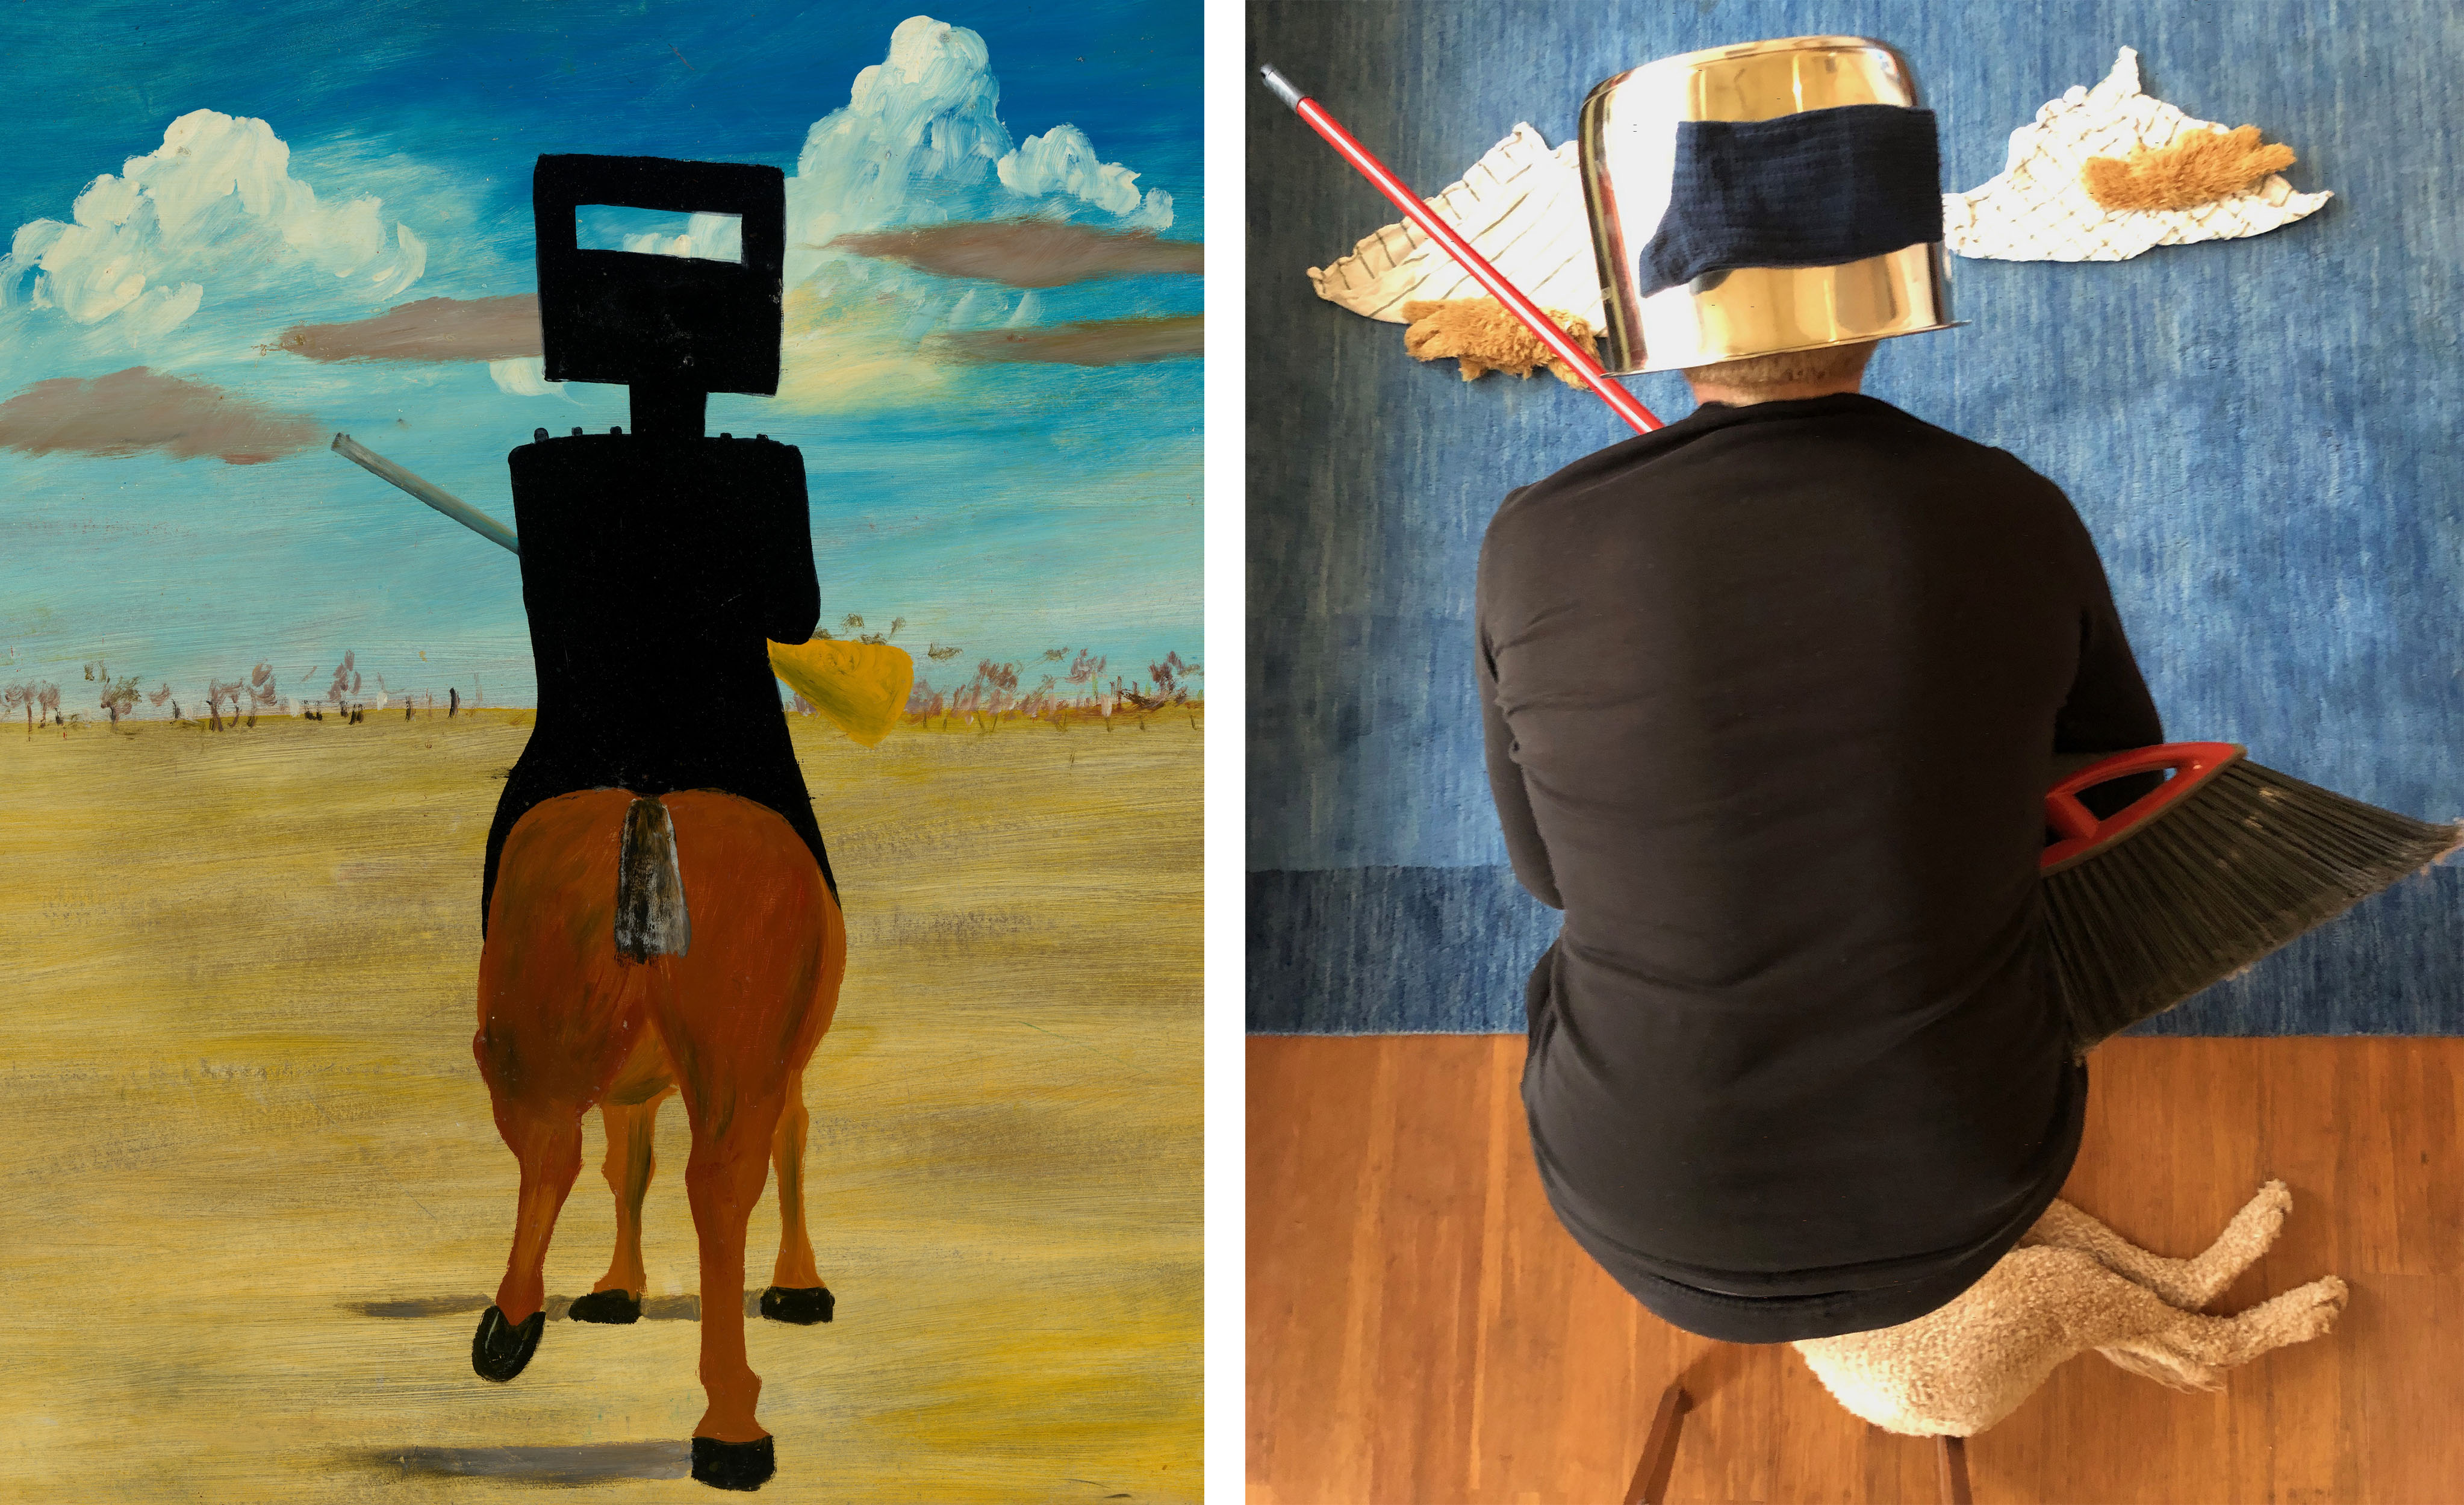 Art lovers are recreating famous works from the NGA in the Stay Home Challenge